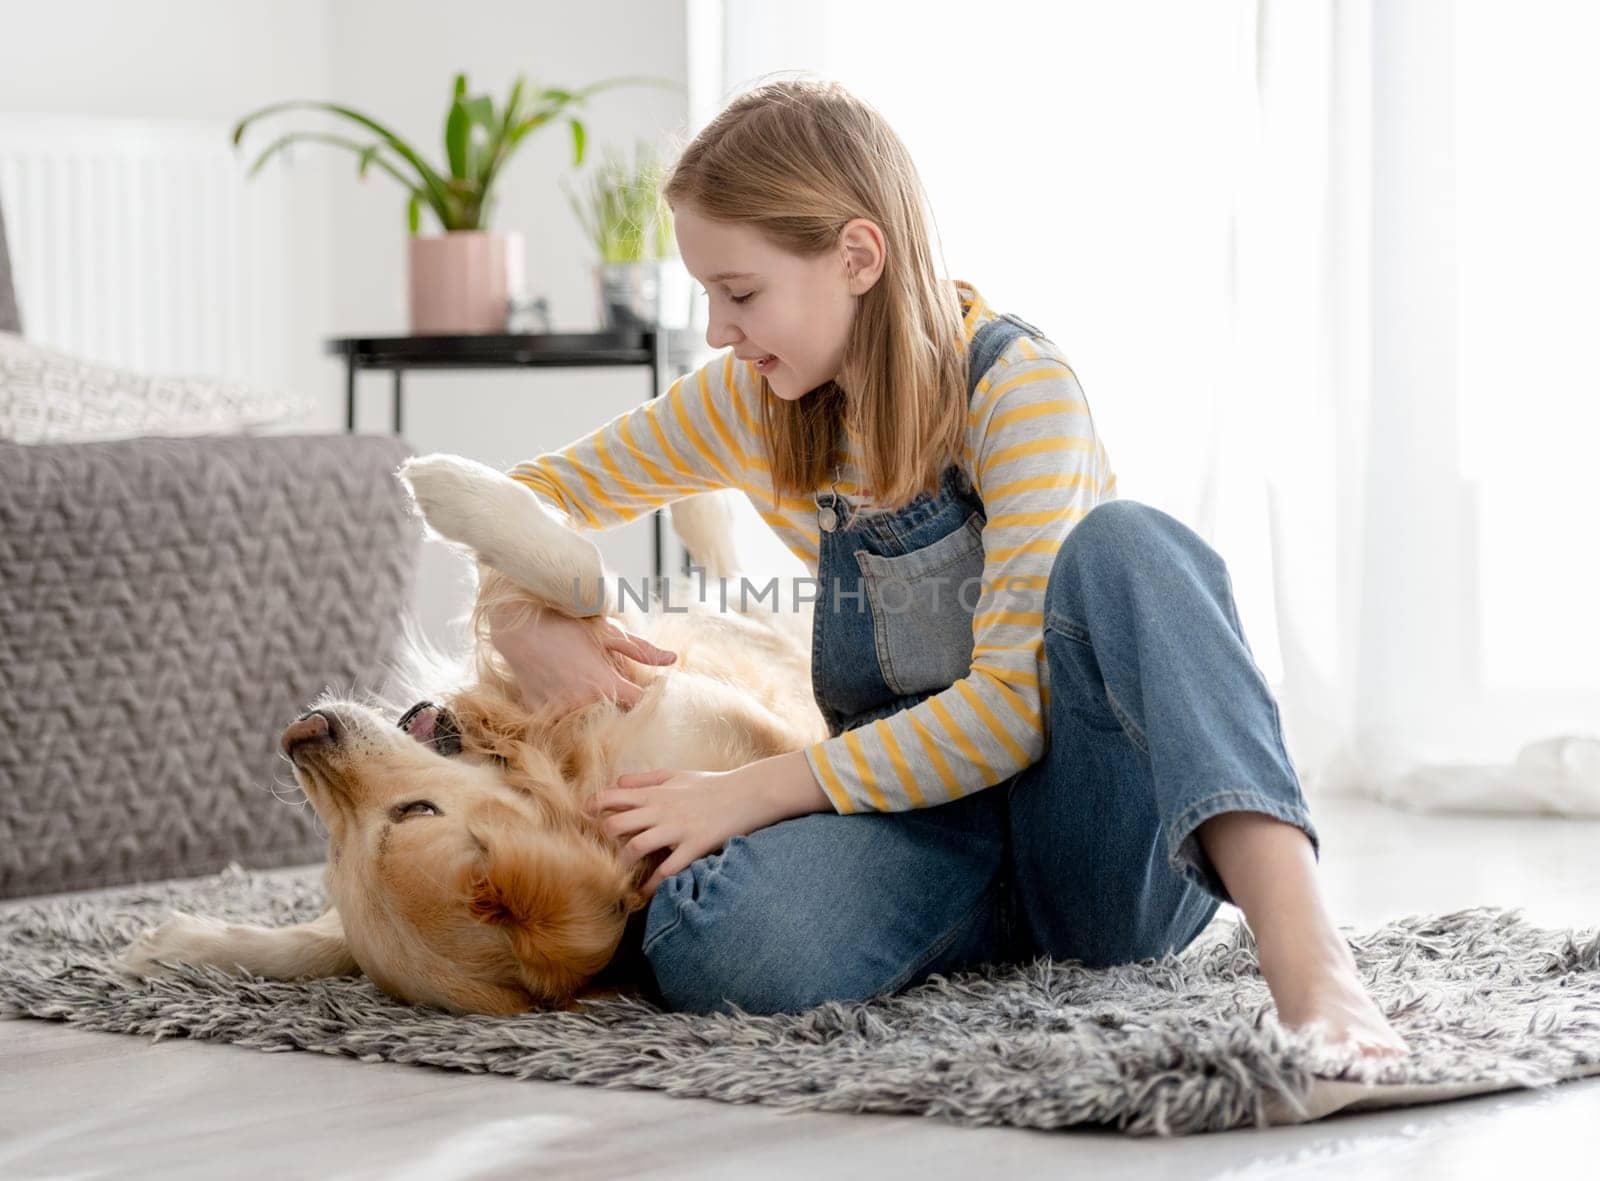 Girl Playing With Golden Retriever On Room Floor by tan4ikk1